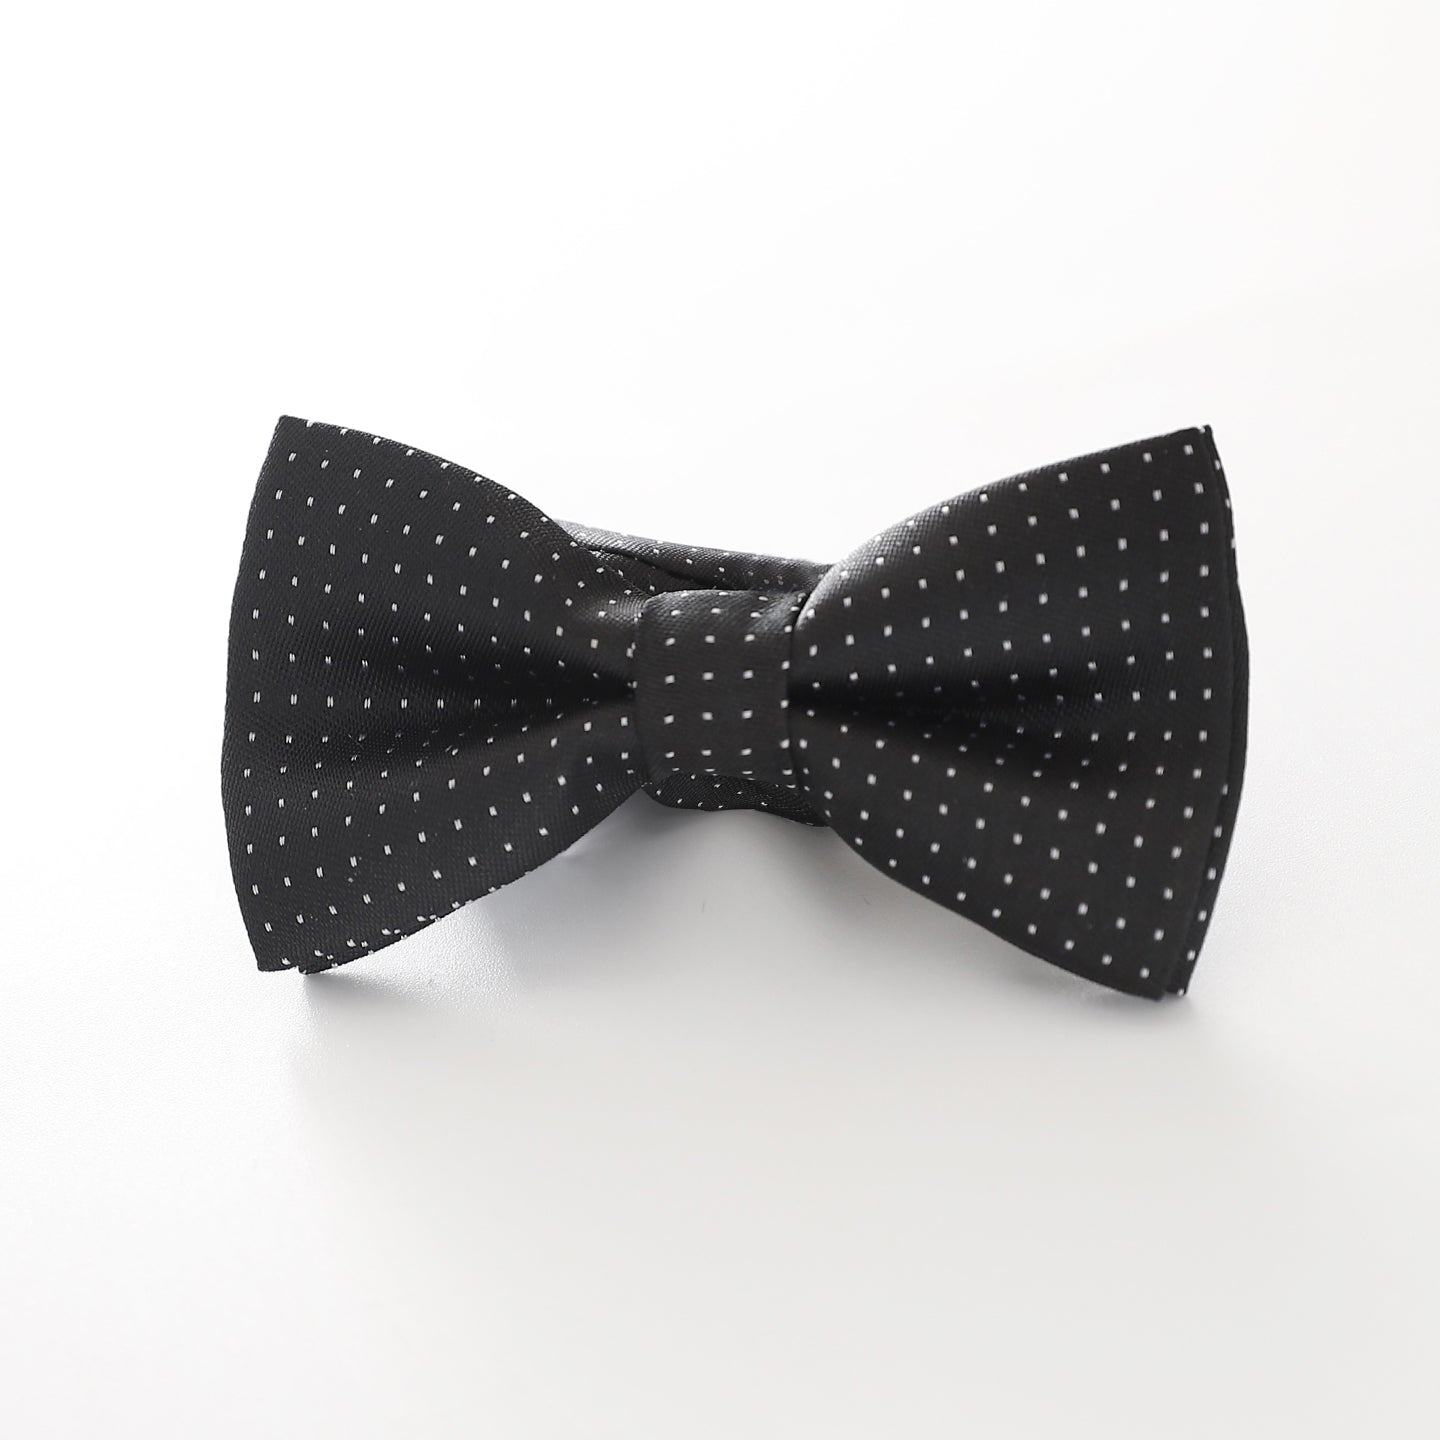 Boys' Patterned Bowtie - Black and White Spot